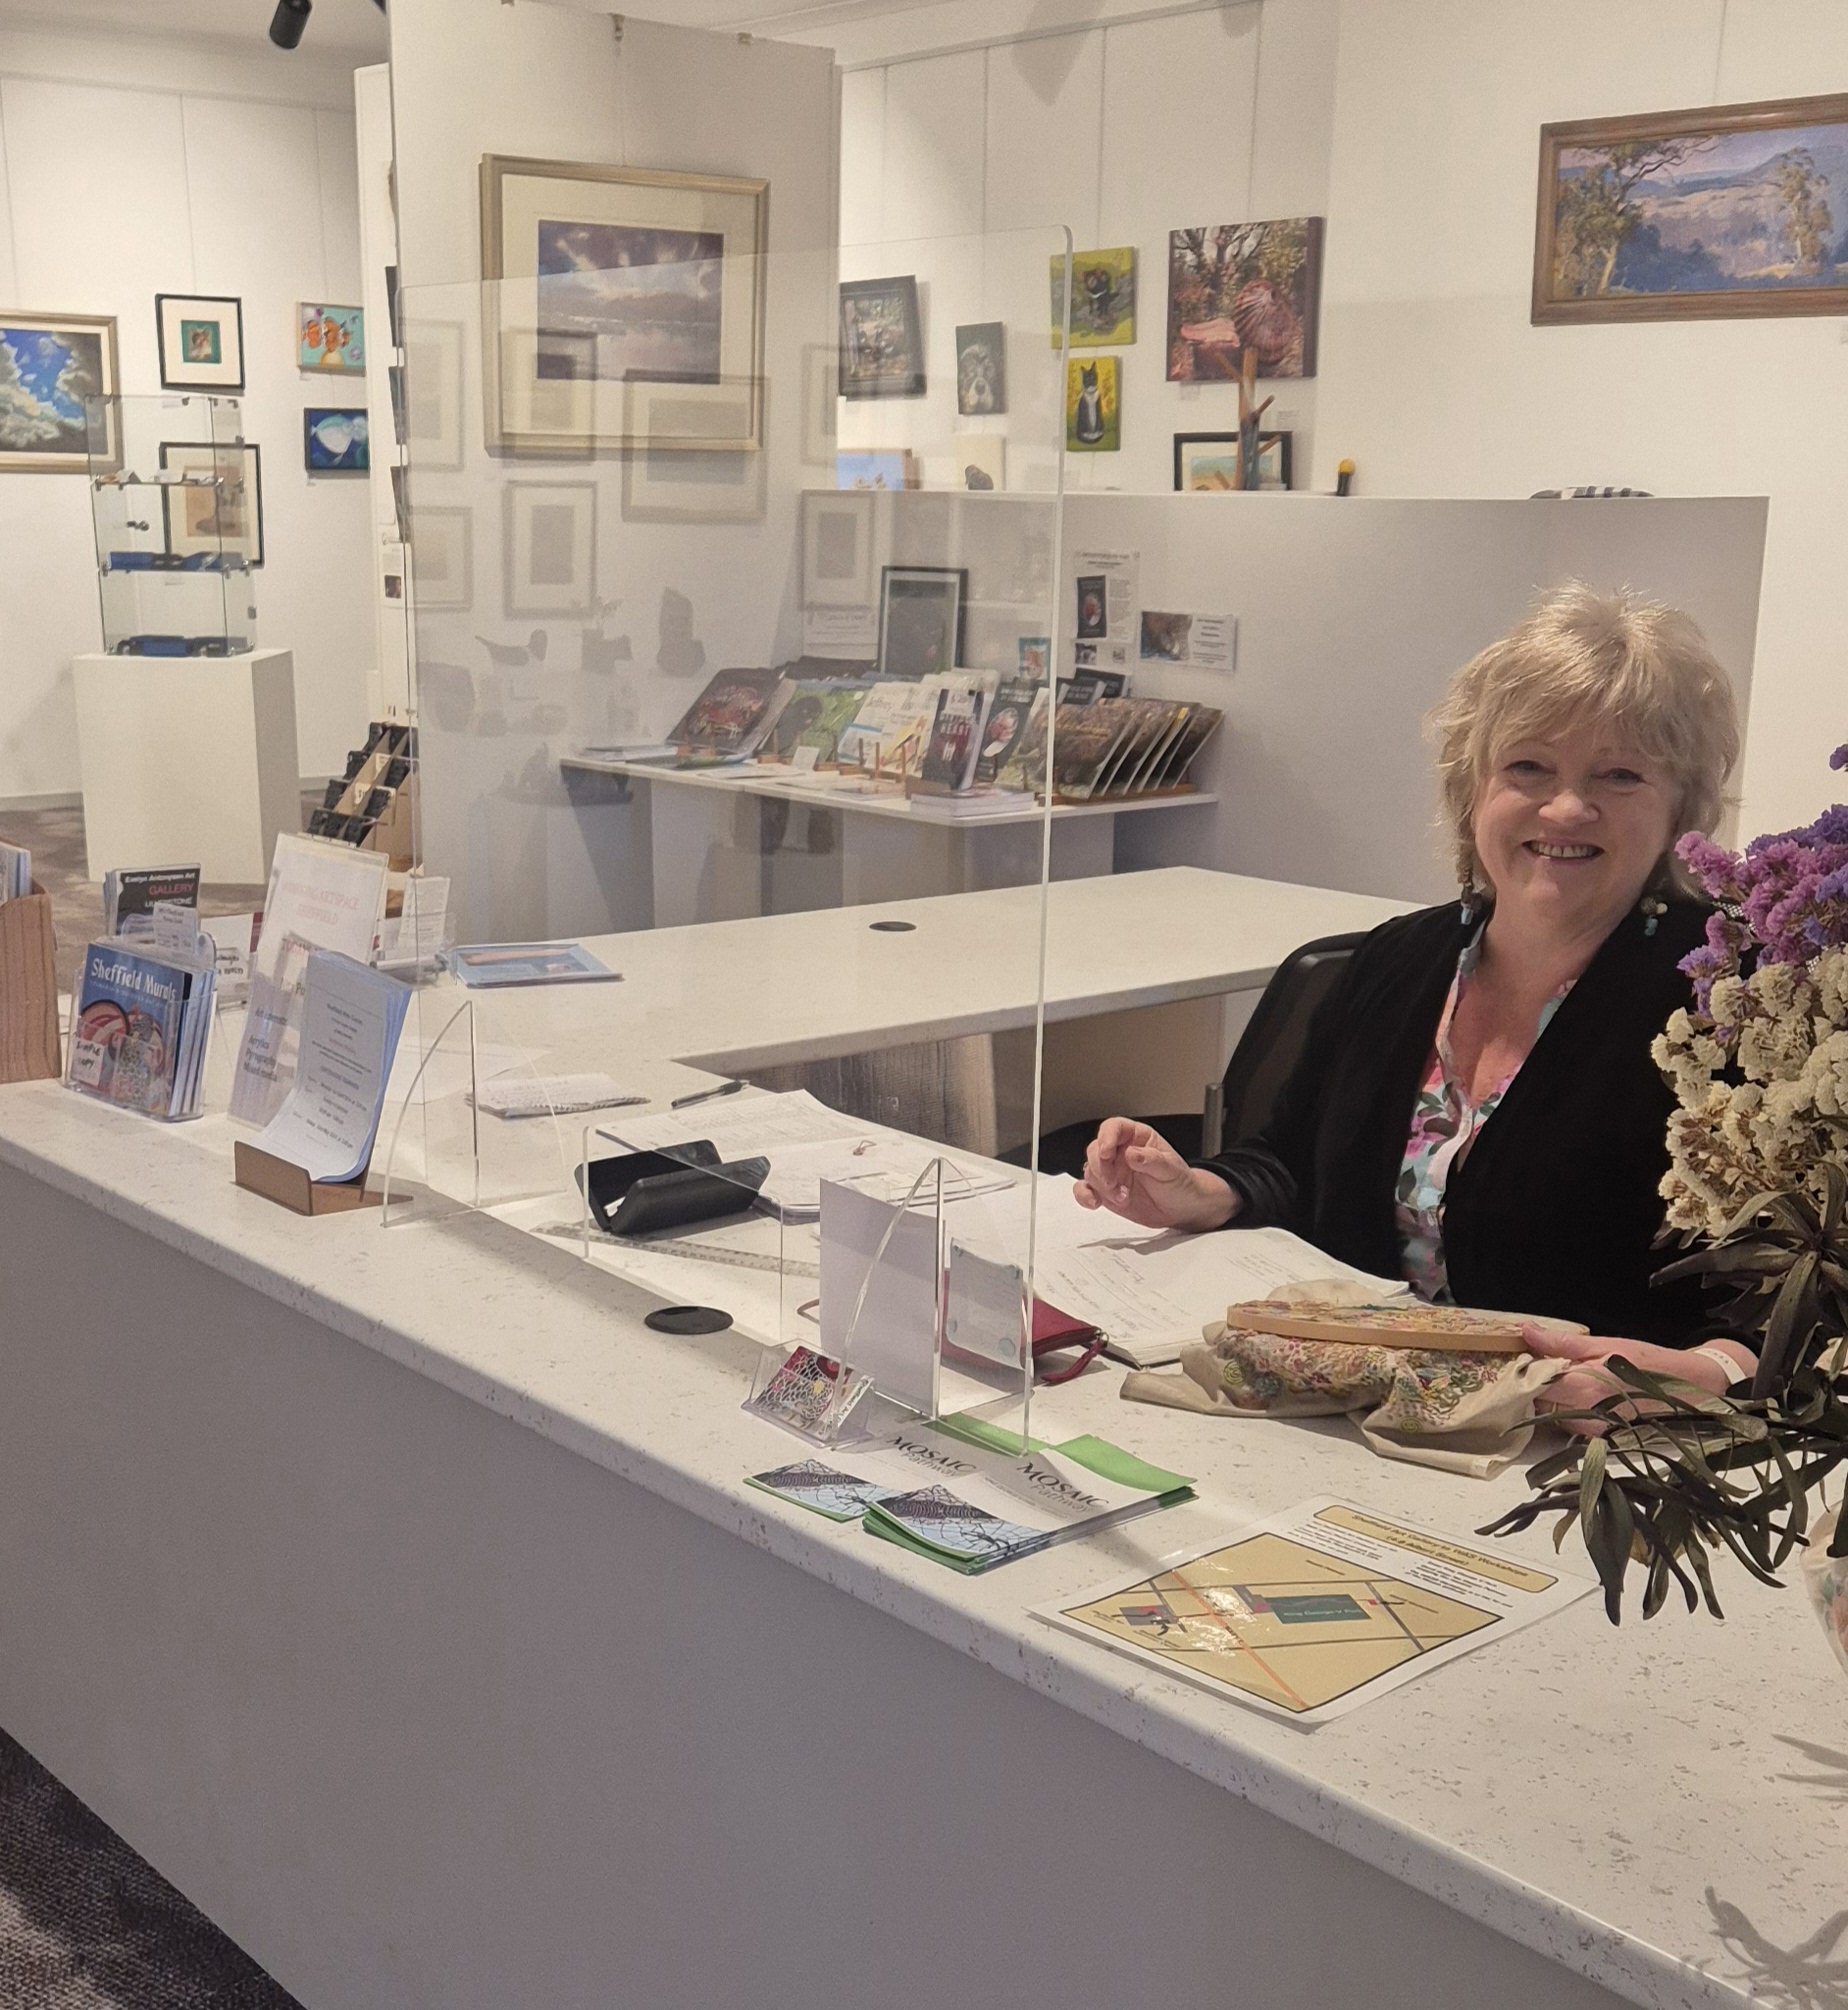 Images shows inside the gallery space at the front desk the Gallery Profile story Discover Local talent, vibrant spaces and community connection at the Sheffield Art Gallery Art Trails Tasmania for the Artists Ensemble membership